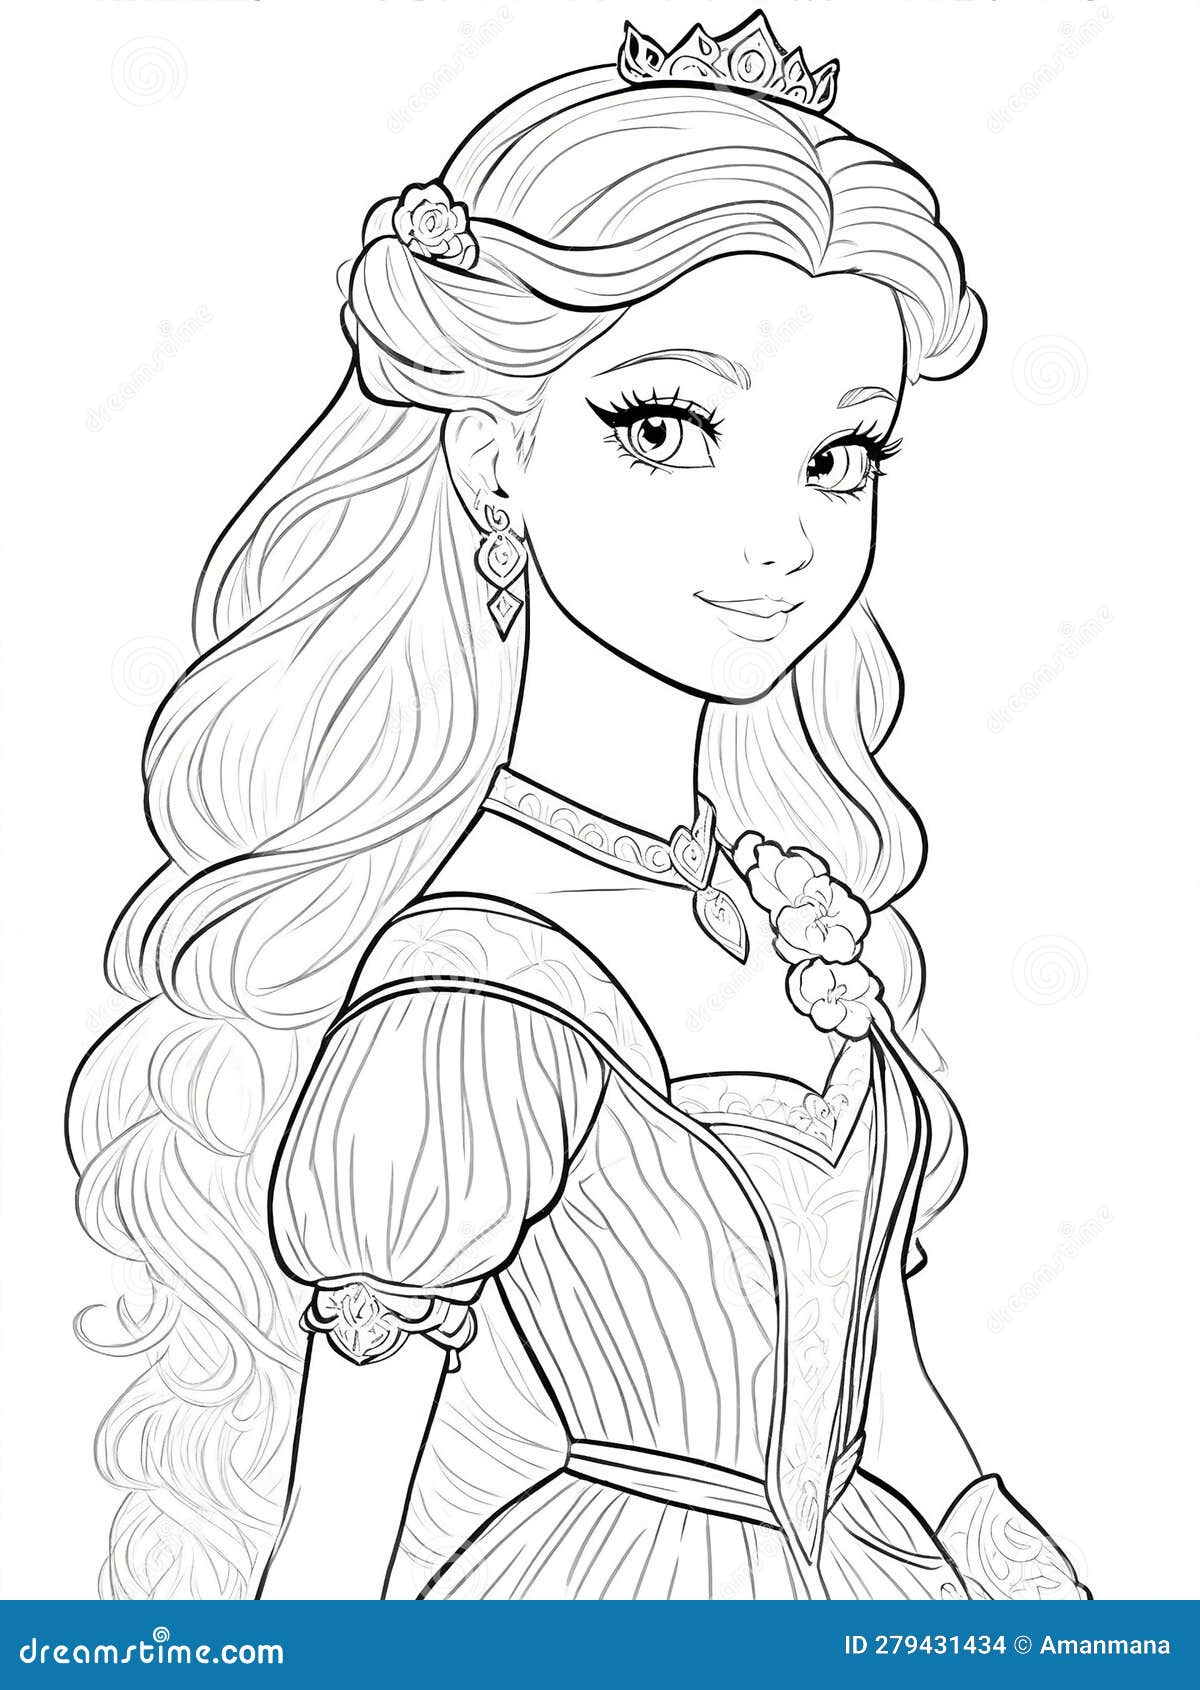 Princess coloring page line art illustration isolated on white background stock illustration